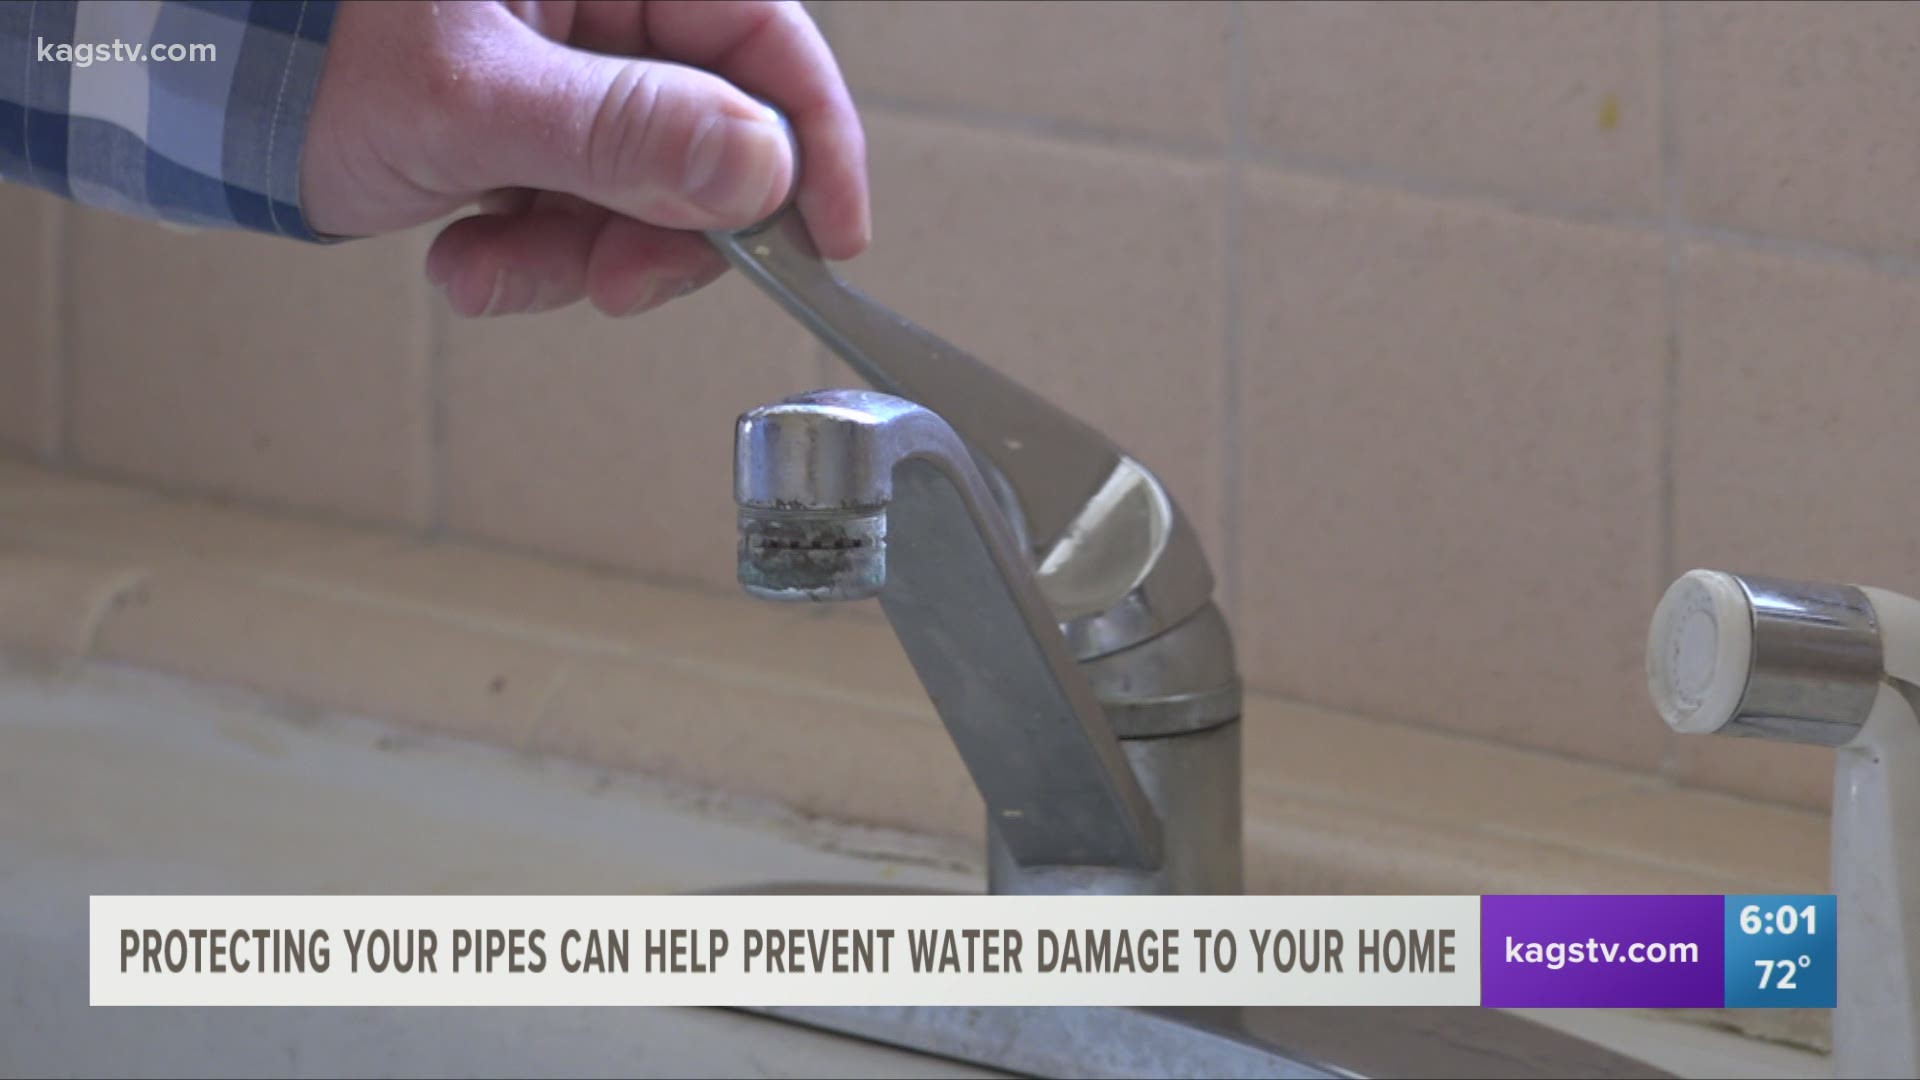 When the temperature drops, remember to protect the three P's: Pets, Pipes and Plants